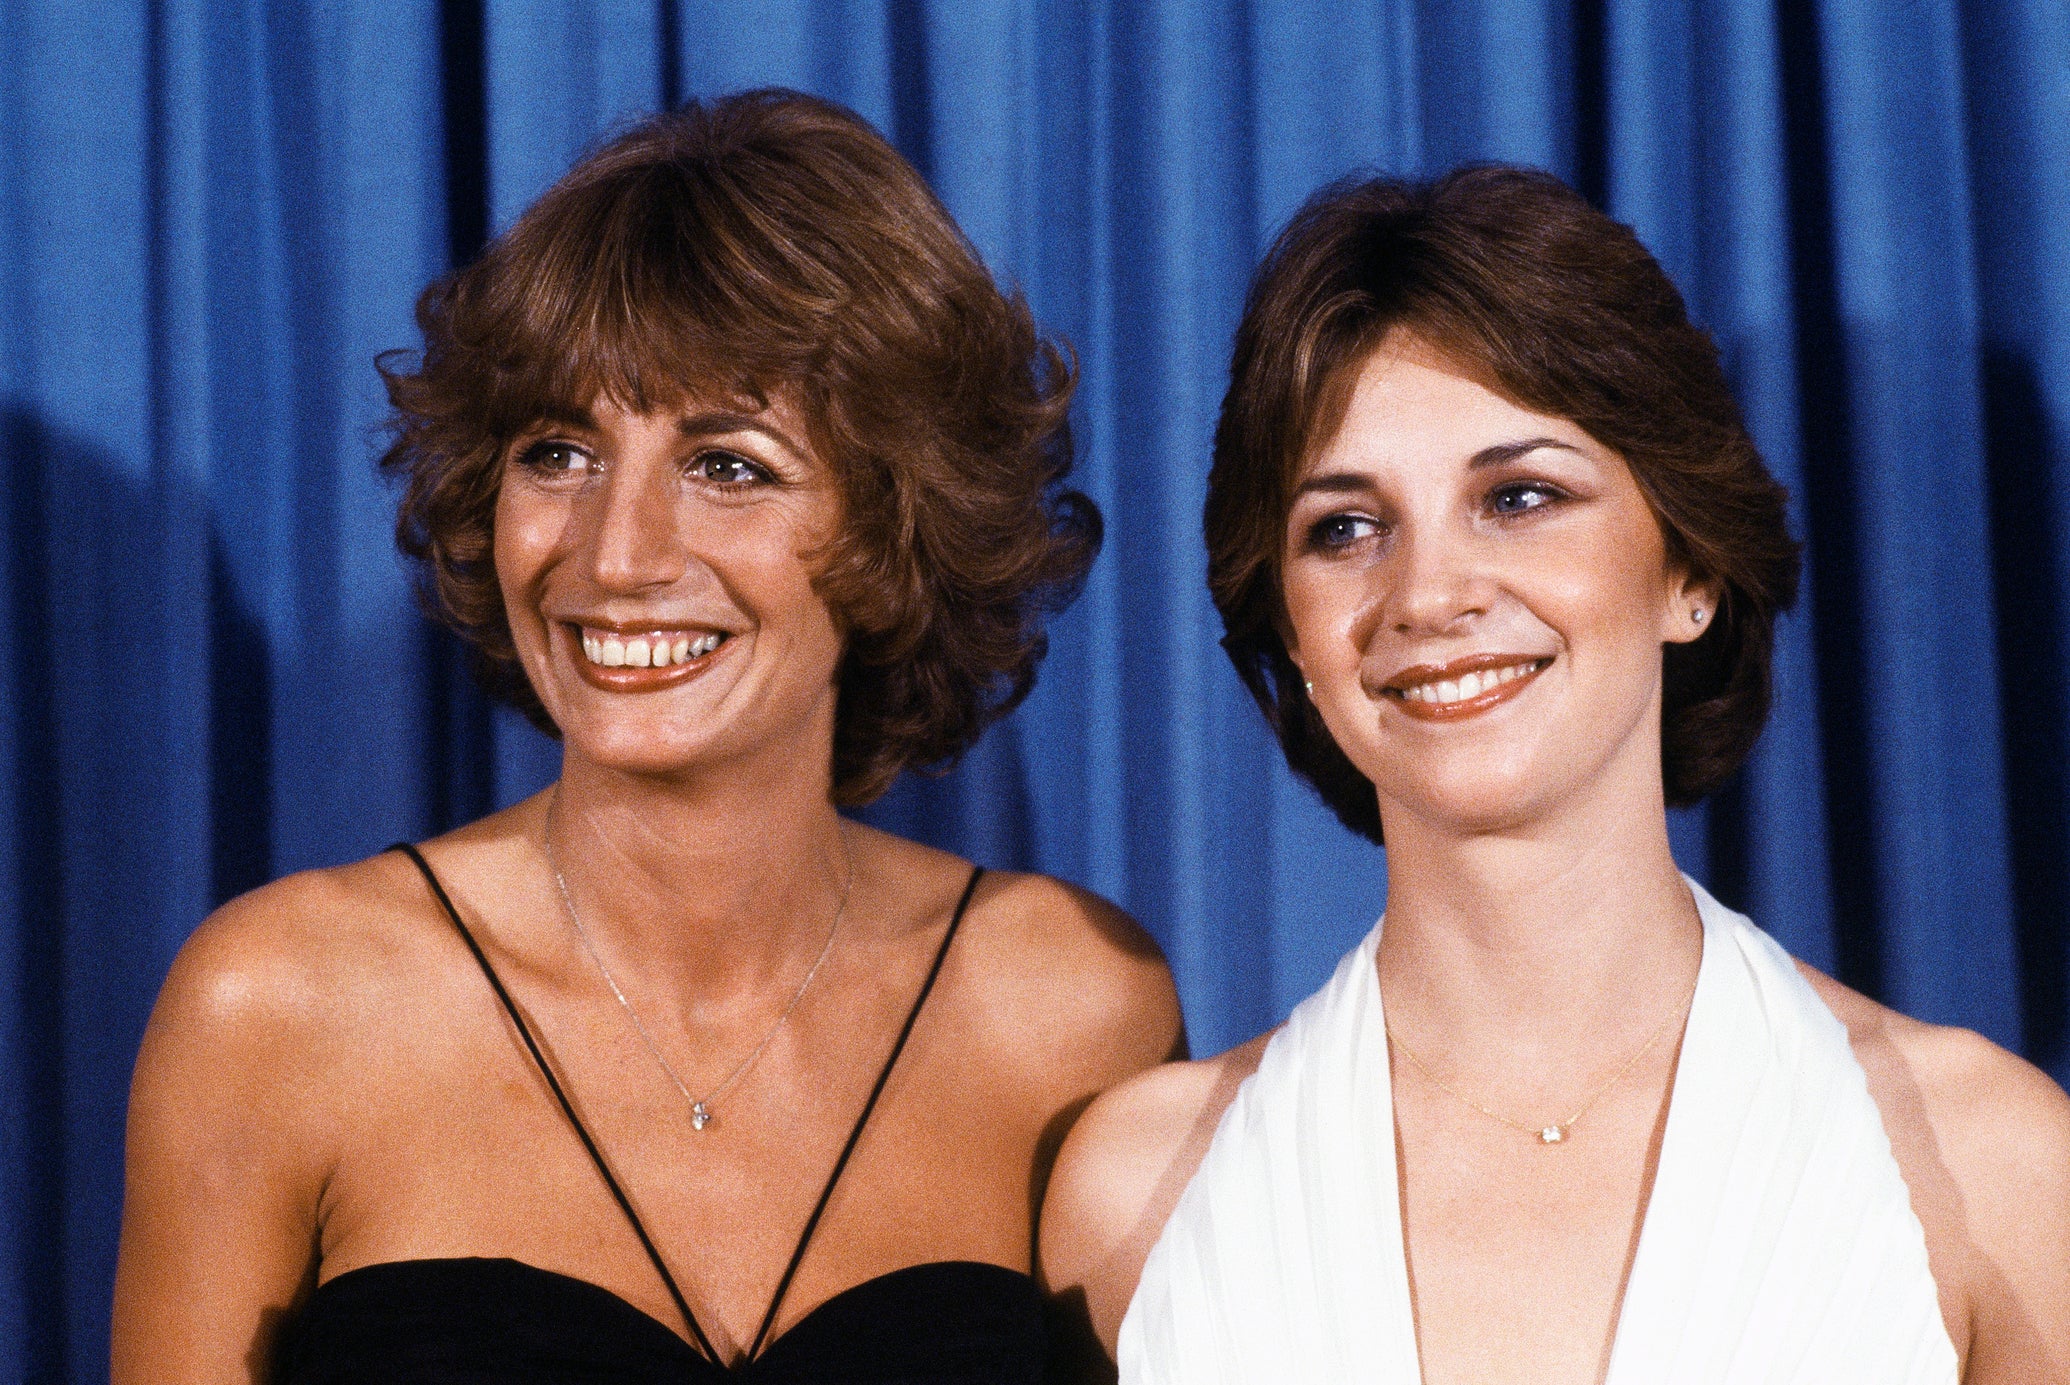 Penny Marshall, left, and Cindy Williams pictured in 1979.